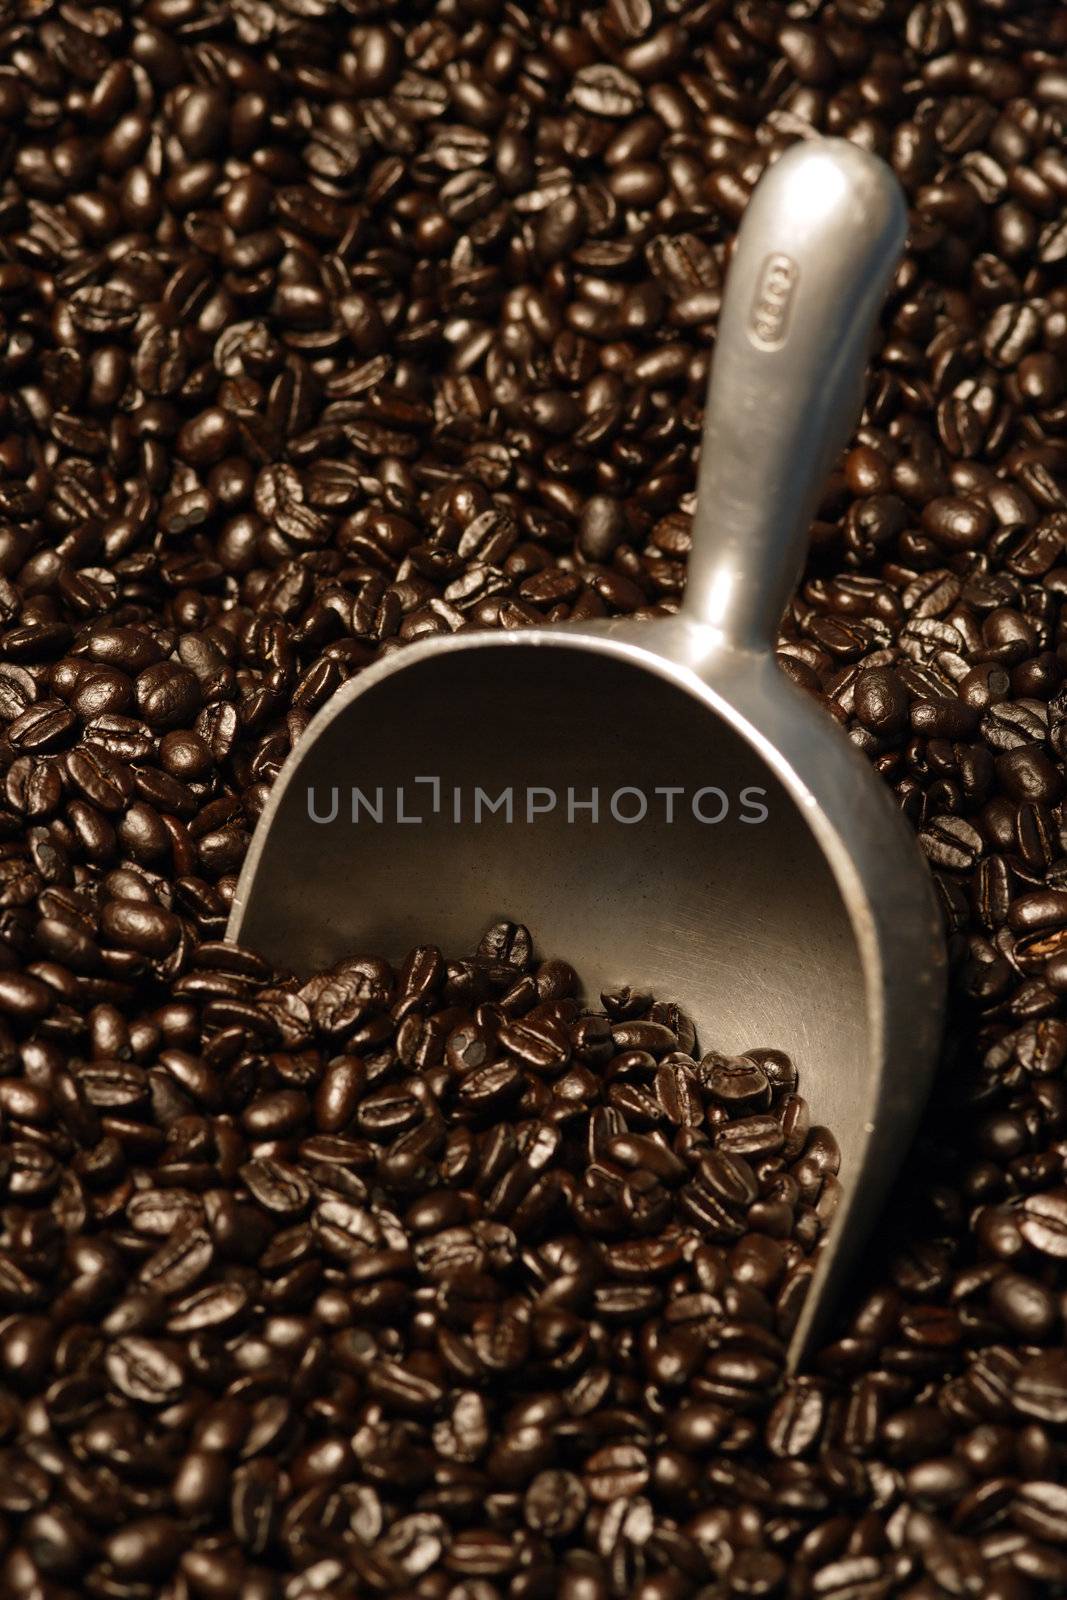 A scoop resting in a bag of freshly roasted coffee beans.  shallow depth of field - focus is across the middle of the image.
